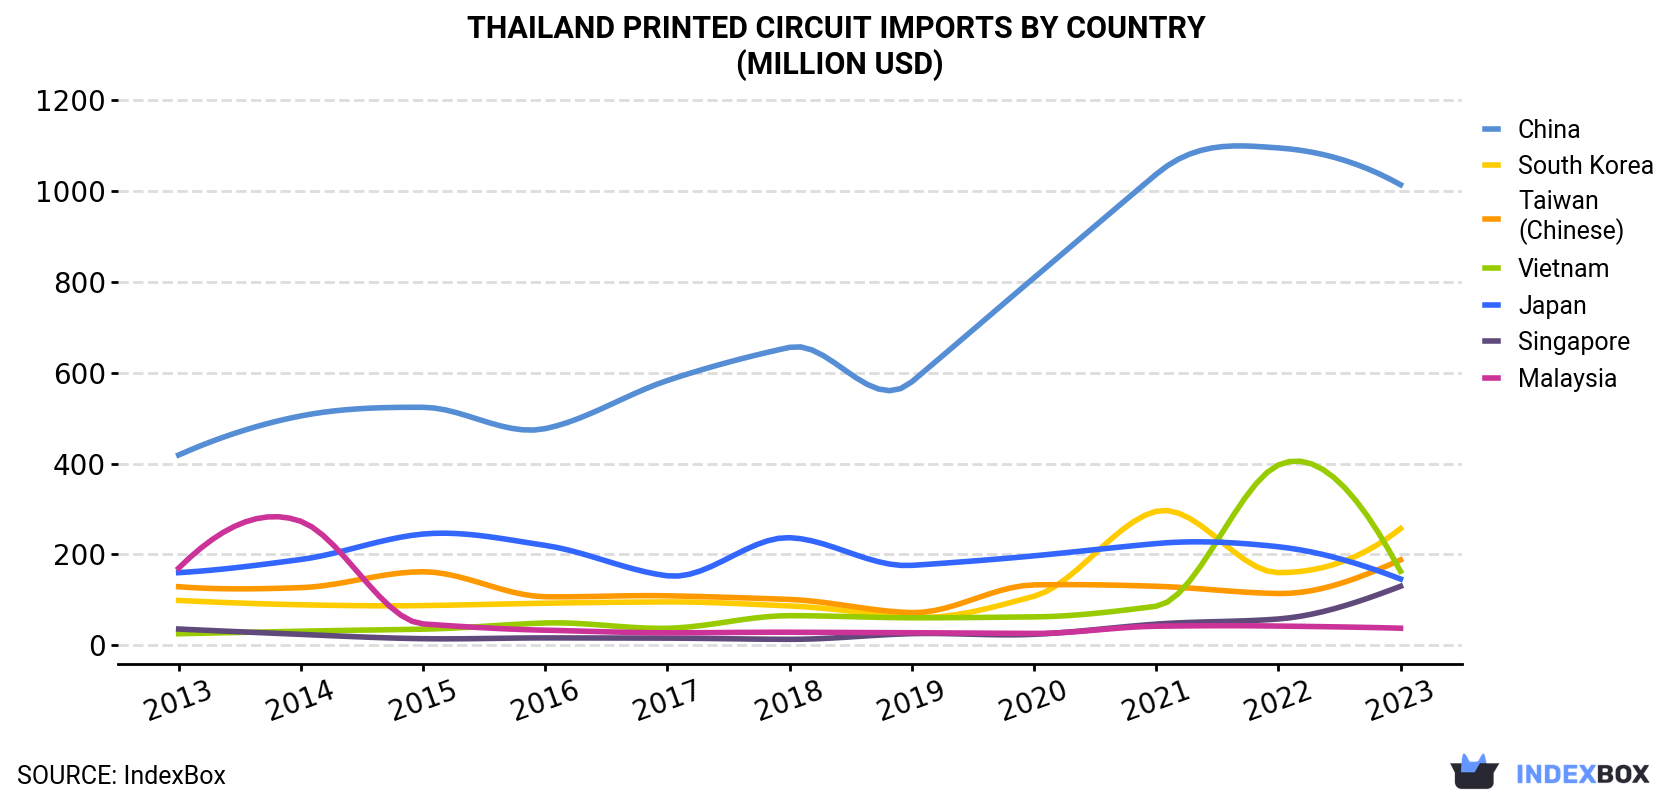 Thailand Printed Circuit Imports By Country (Million USD)